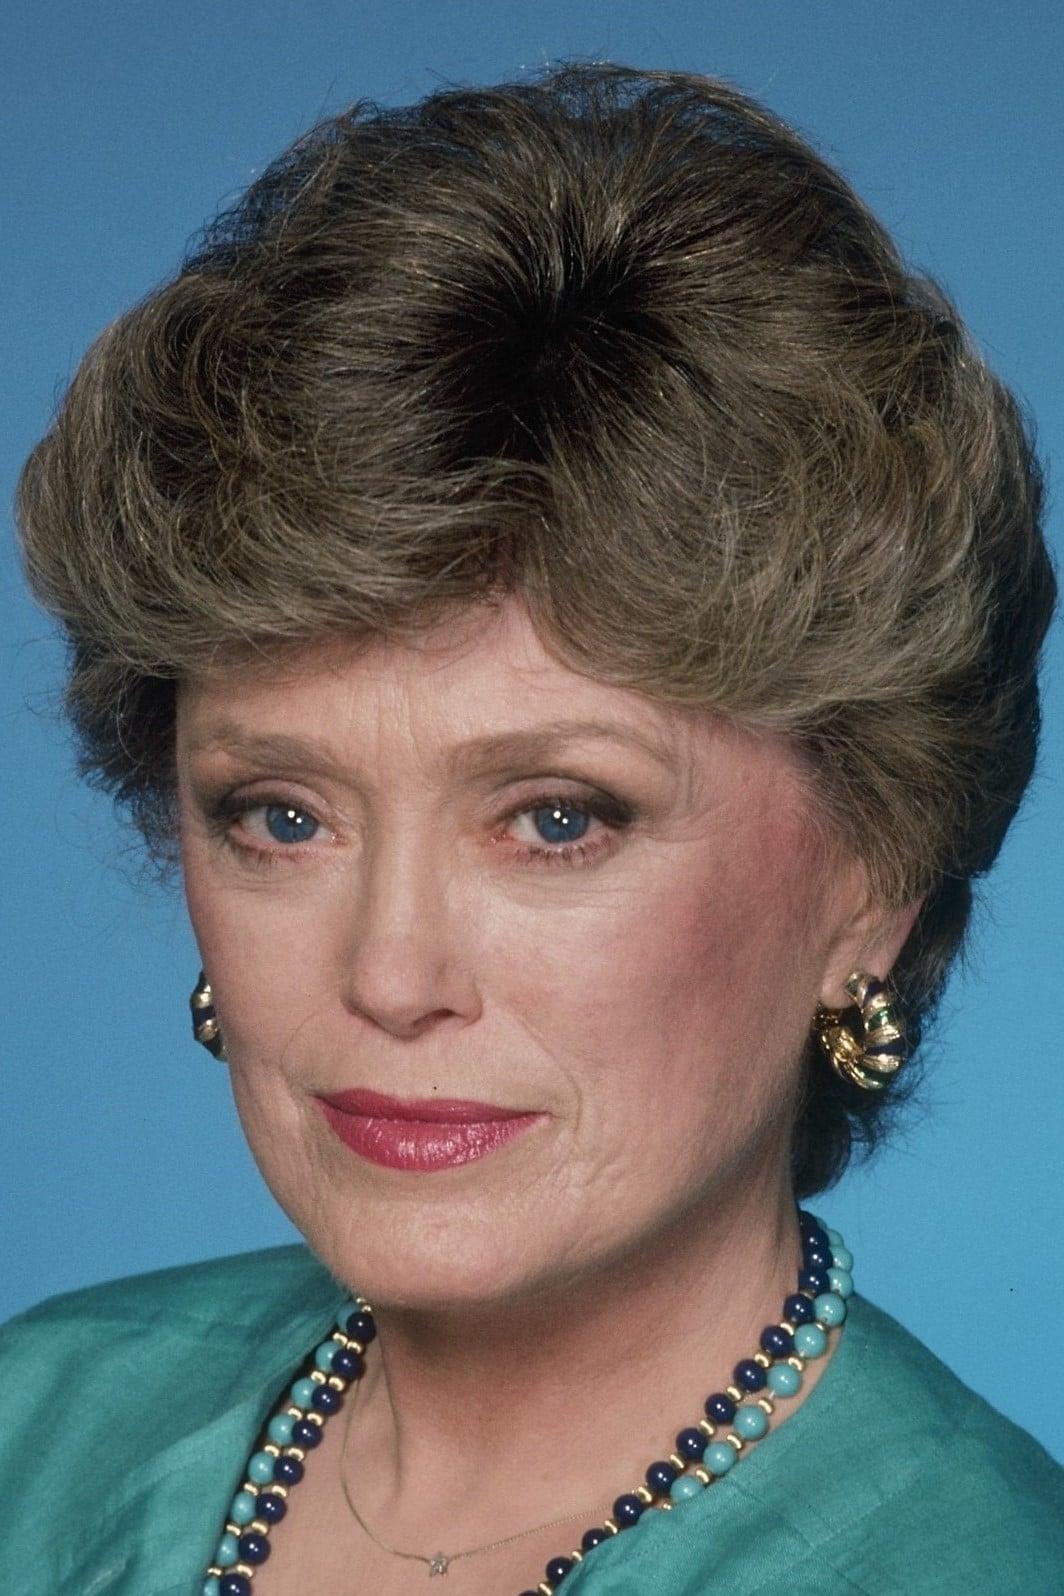 Rue McClanahan poster